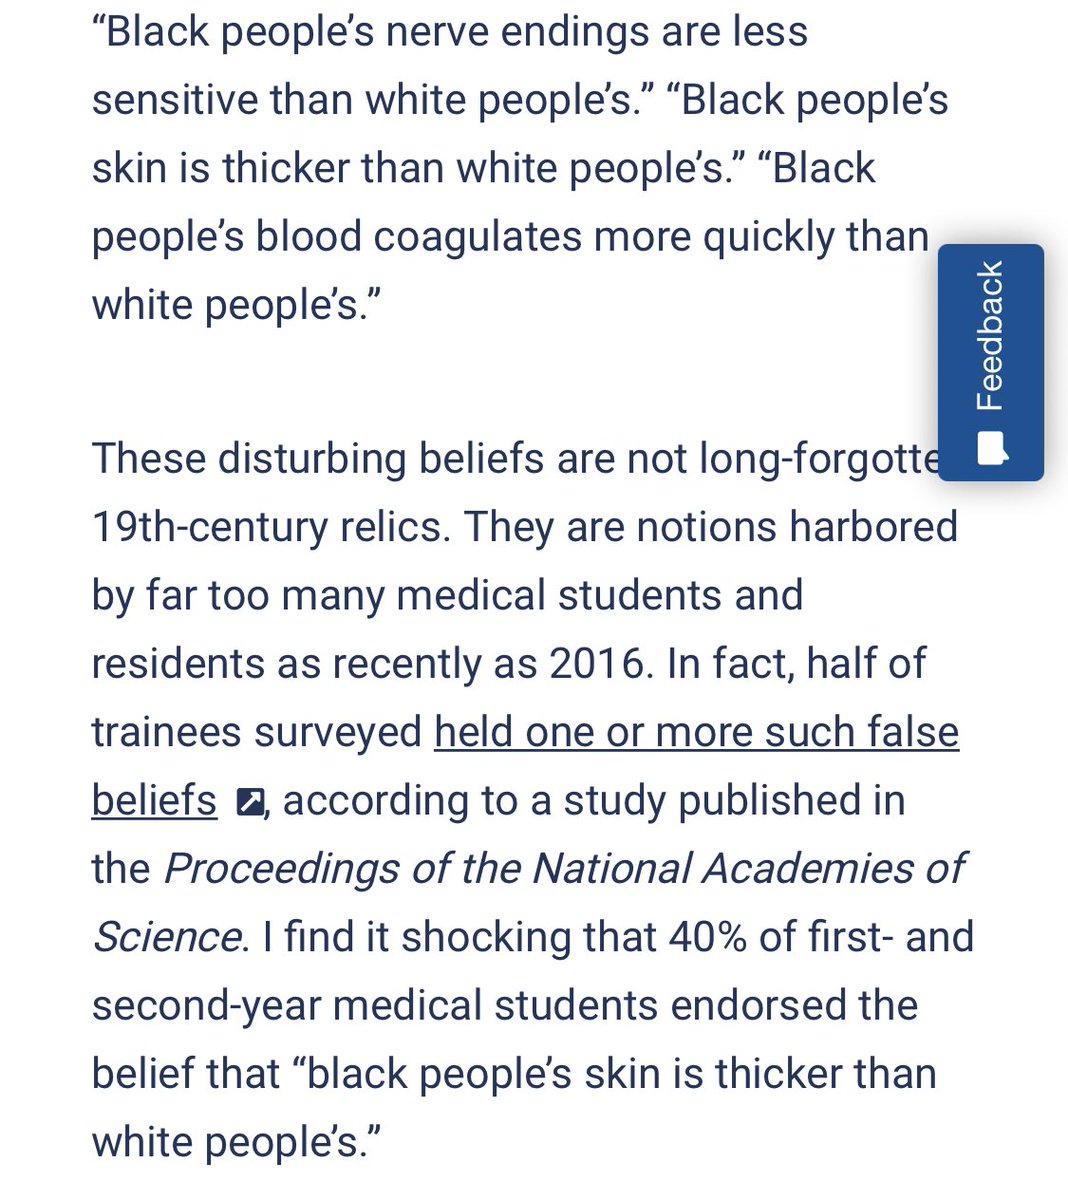 These things may seem trivial if you’re white but if you’re Black, it can literally mean life or death, which is a big reason I don’t go to white doctors if I can avoid it.Why?